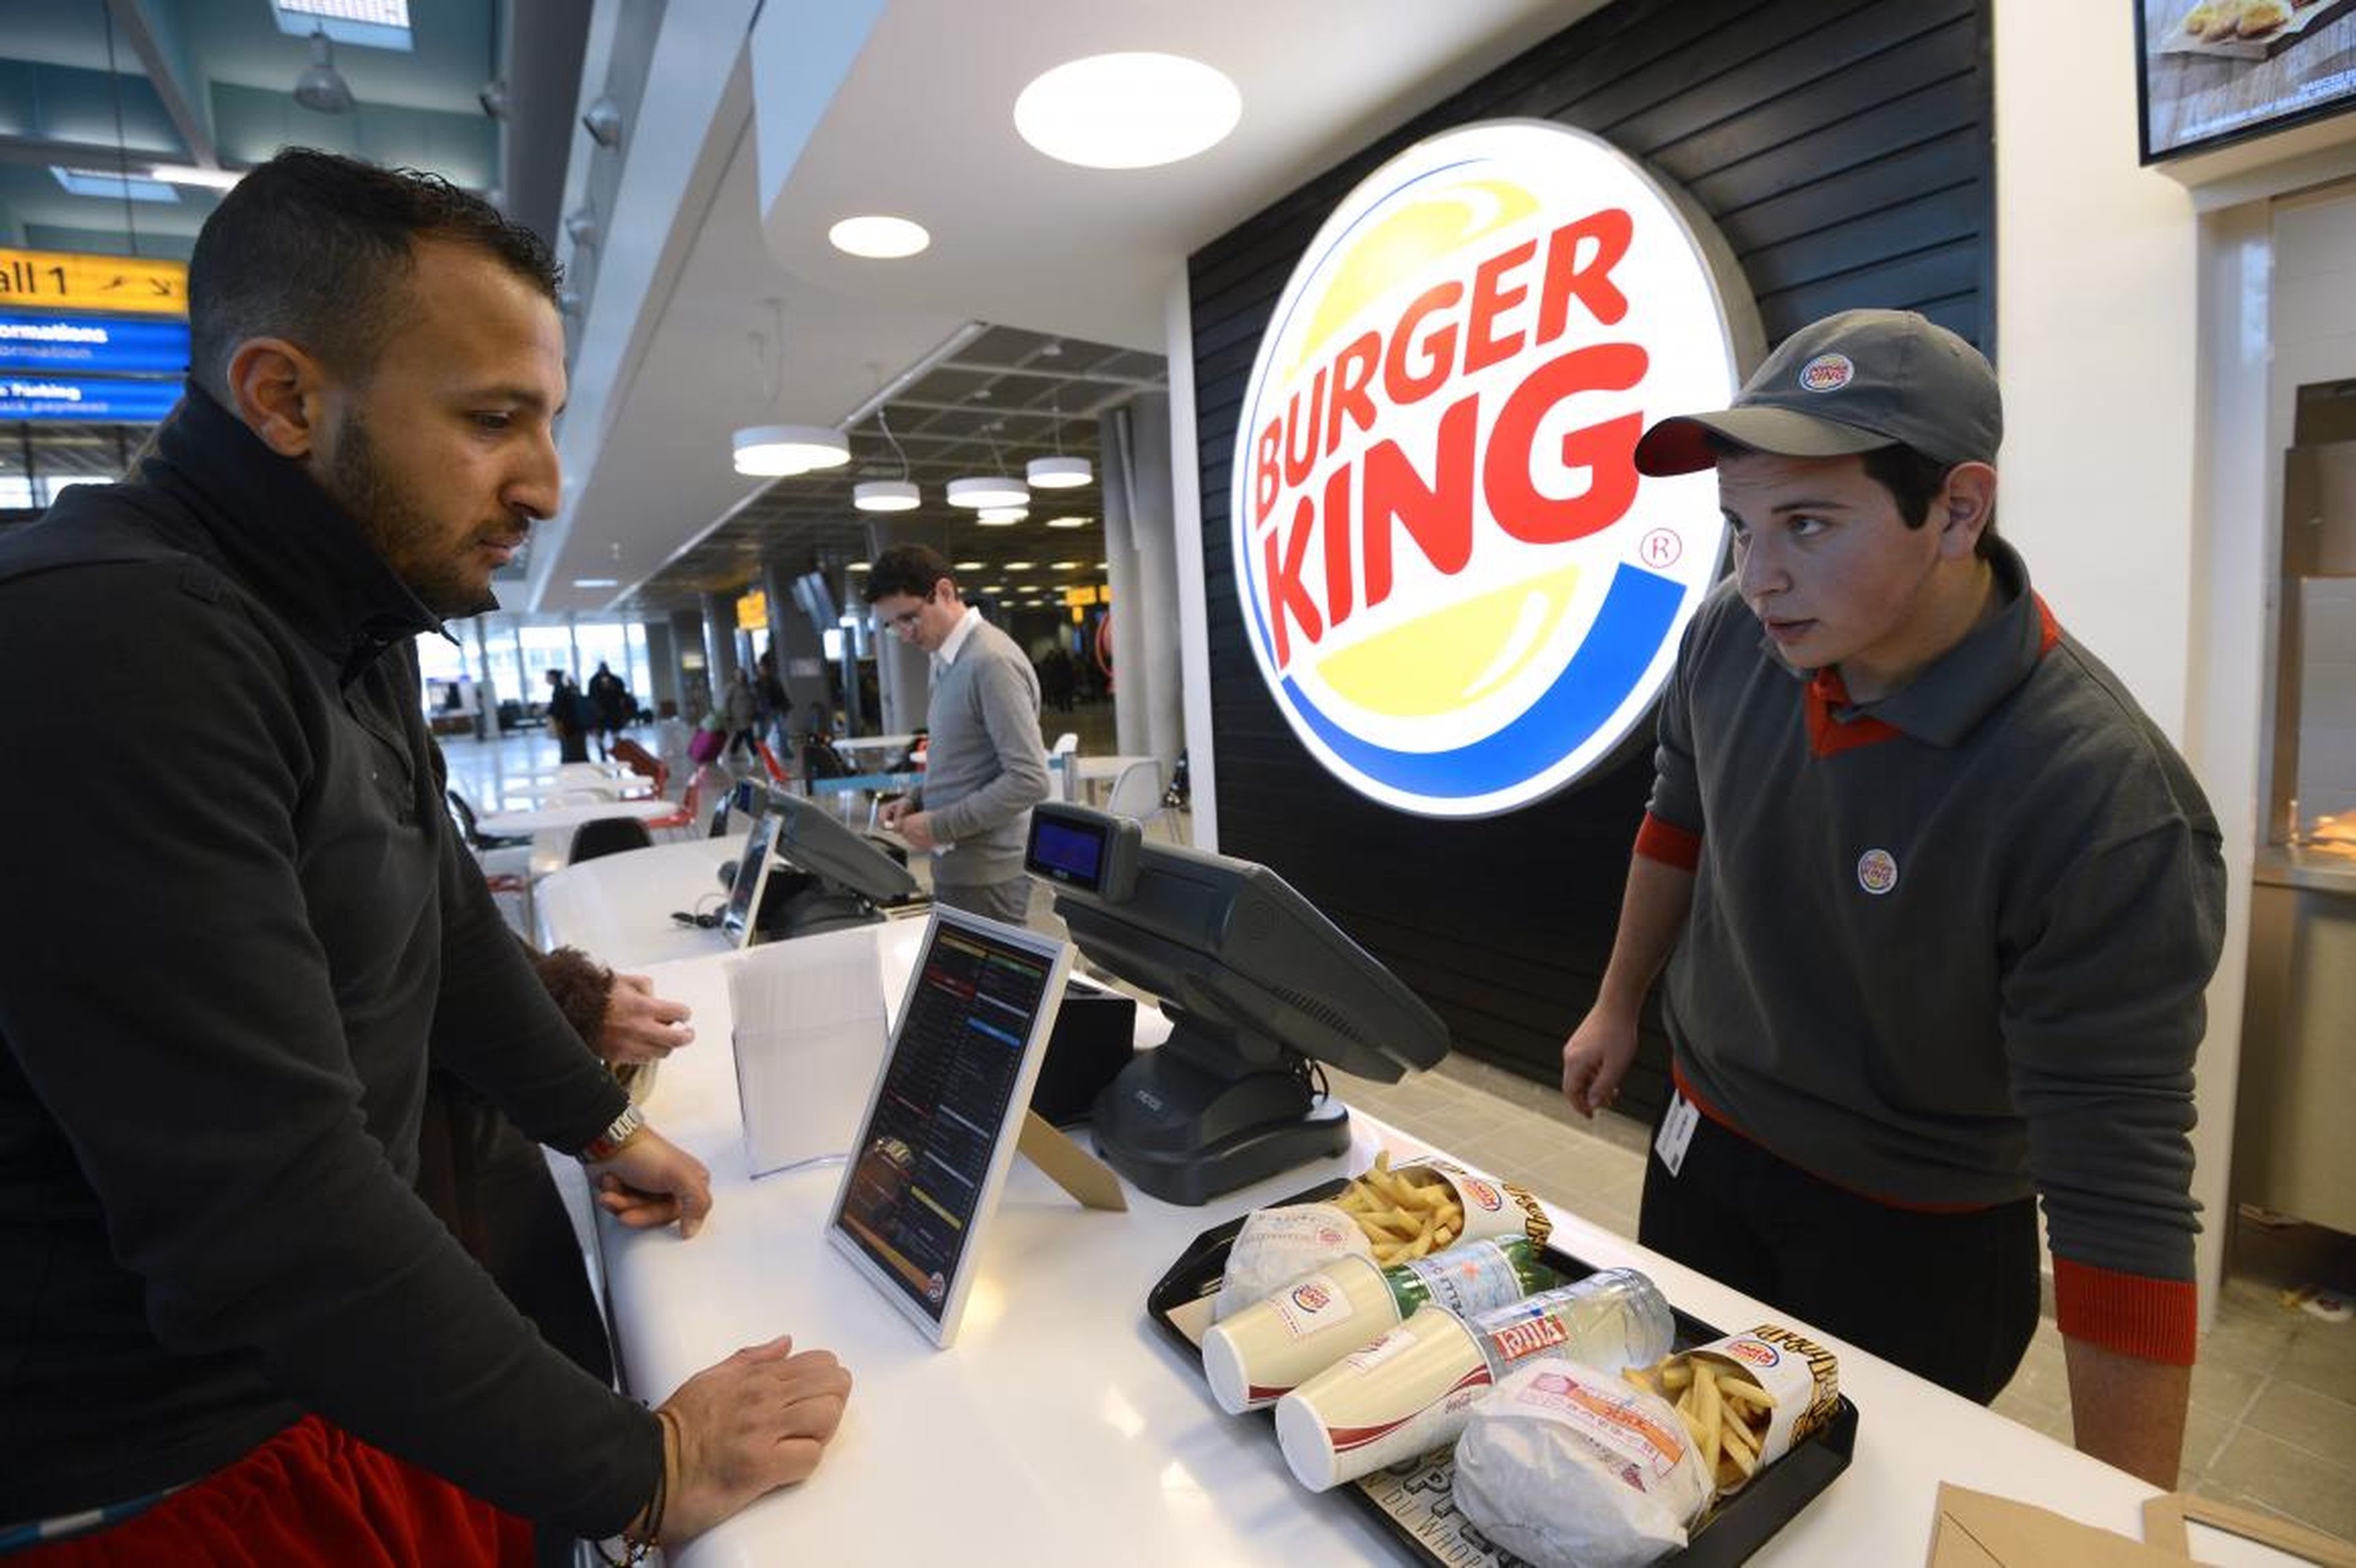 After struggling throughout the early 2000s, Burger King underwent a complete aesthetic overhaul in 2012. Its restaurants were remodeled and its uniforms redesigned to a steely gray. However, its aesthetic redesign was less than